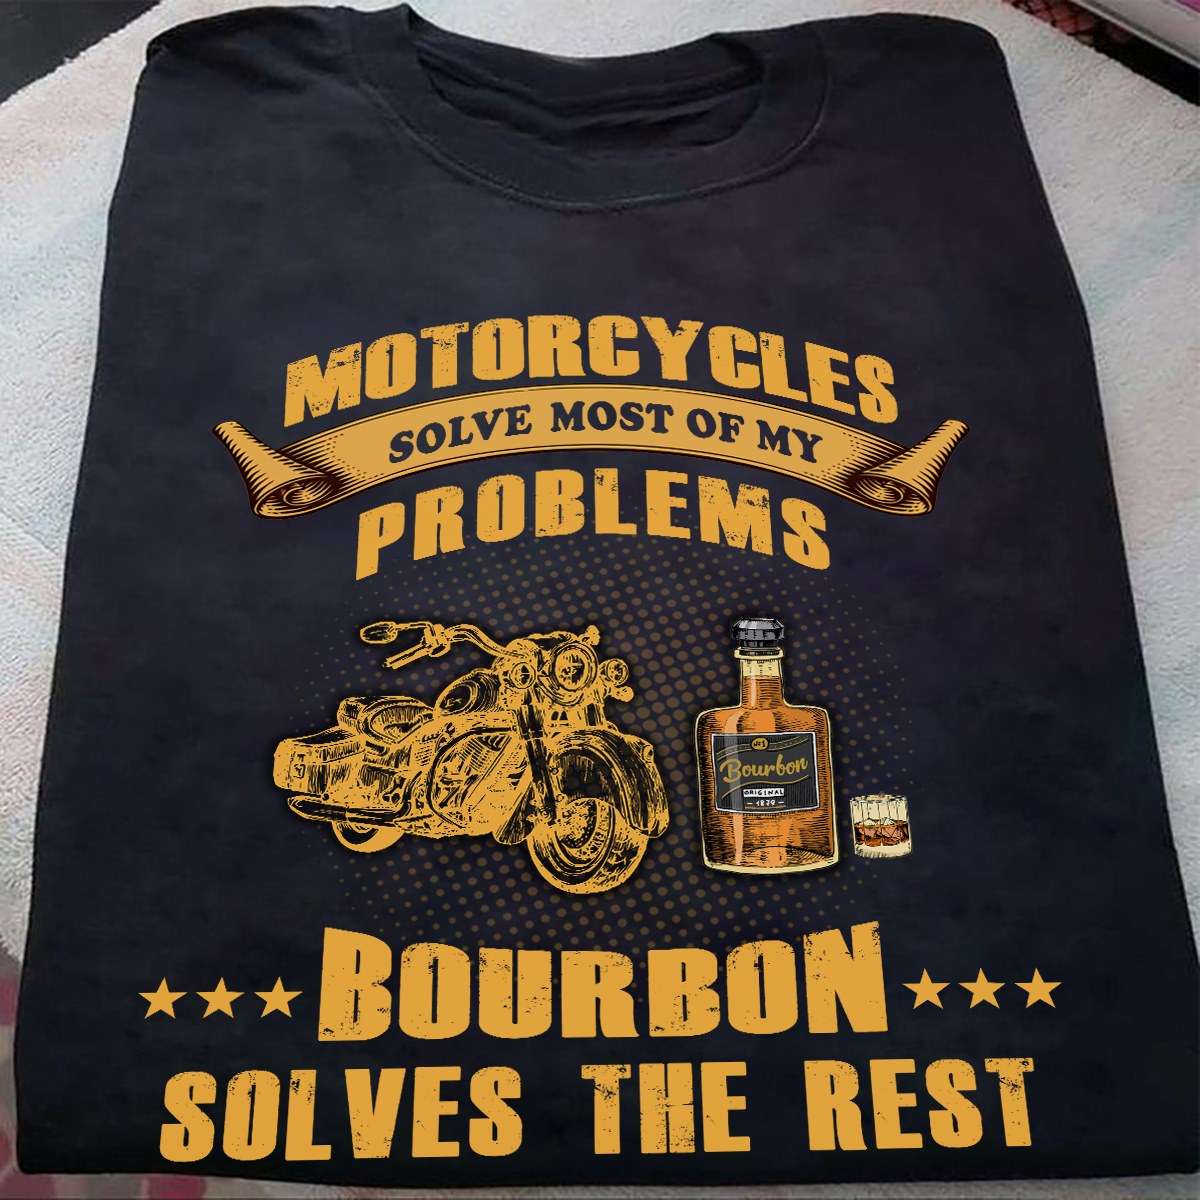 Motorcycles solve most of my problems, bourbon solves the rest - Motorcycle and bourbon, wine drinker gift